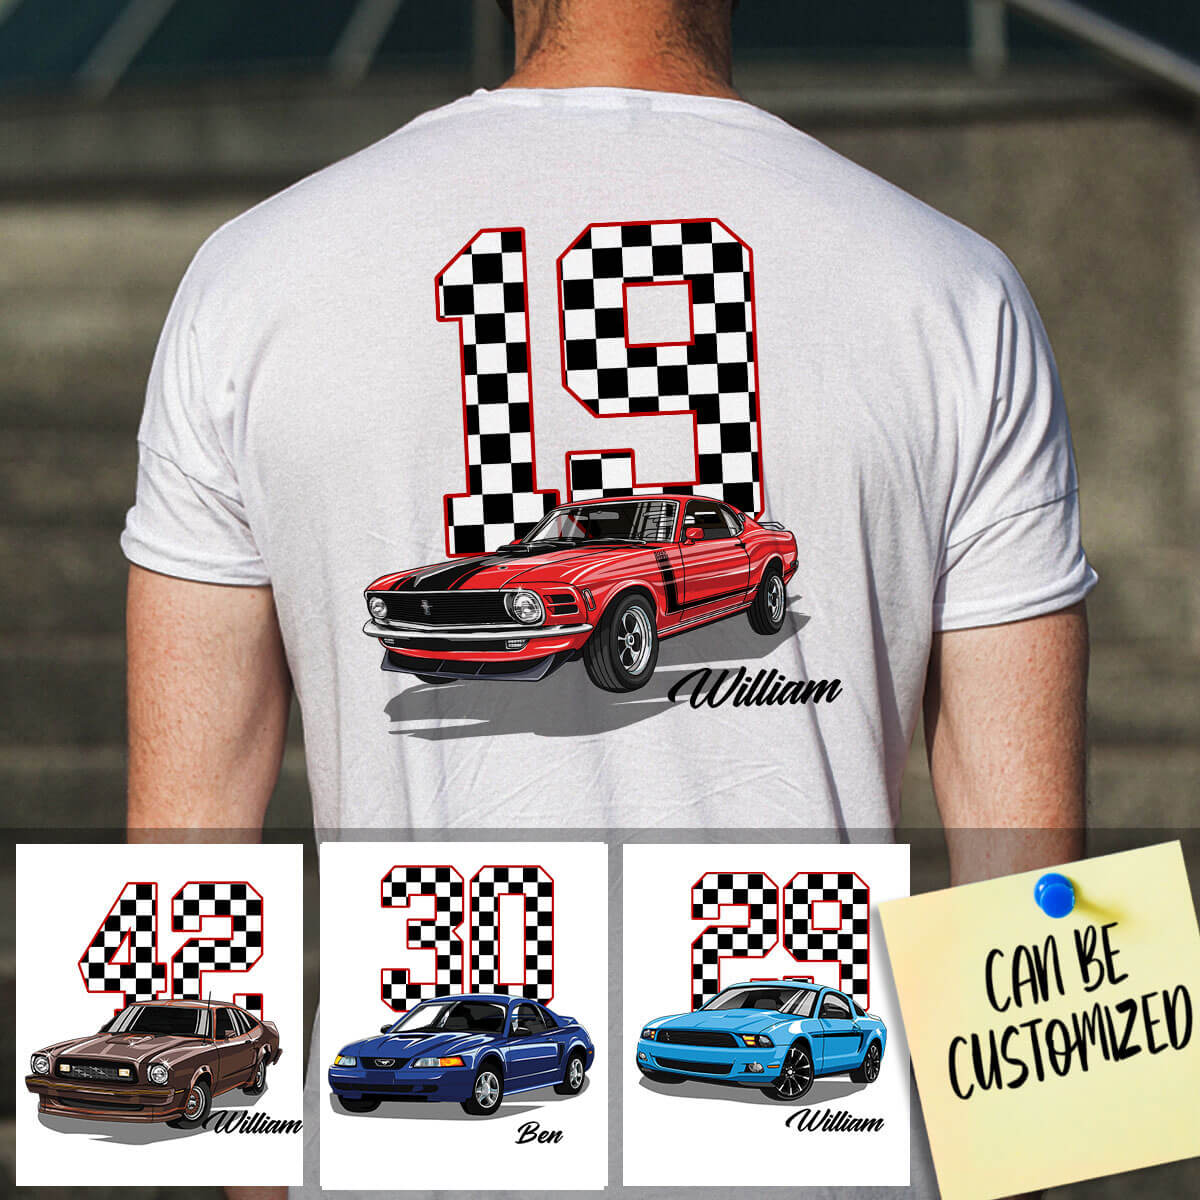 Fa StreetKars Customized - T-shirt Art Mustang Art And - Graphic Collection Mustang